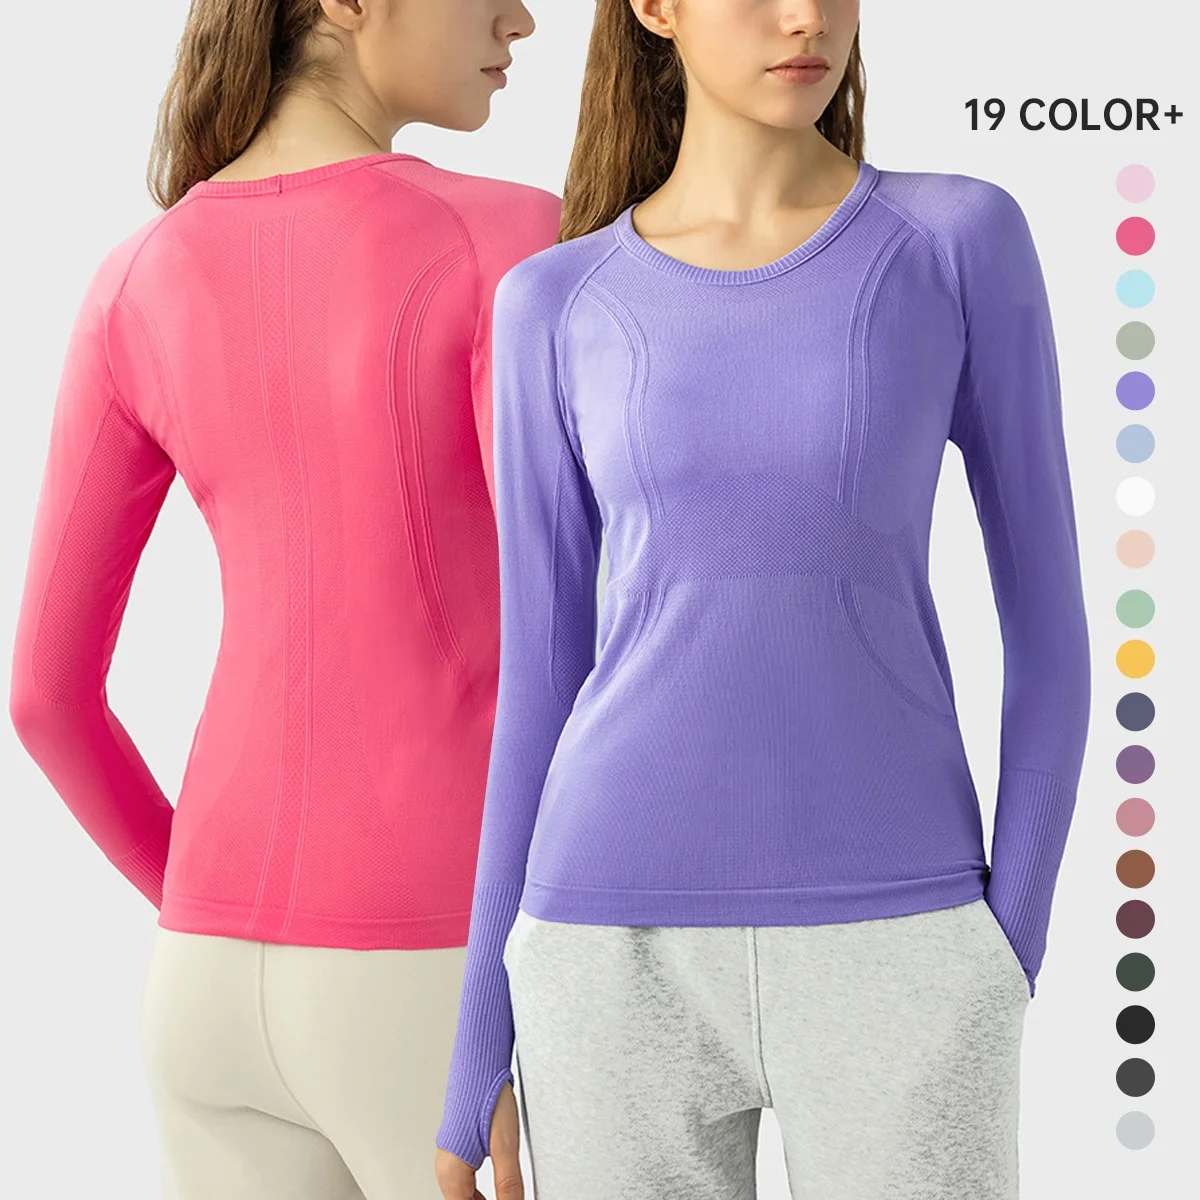 

SHINBENE Equestrian Long Sleeve seamless fitness wear yoga Top wear Women's Running Athletic gym Workout Shirt with Thumb Holes